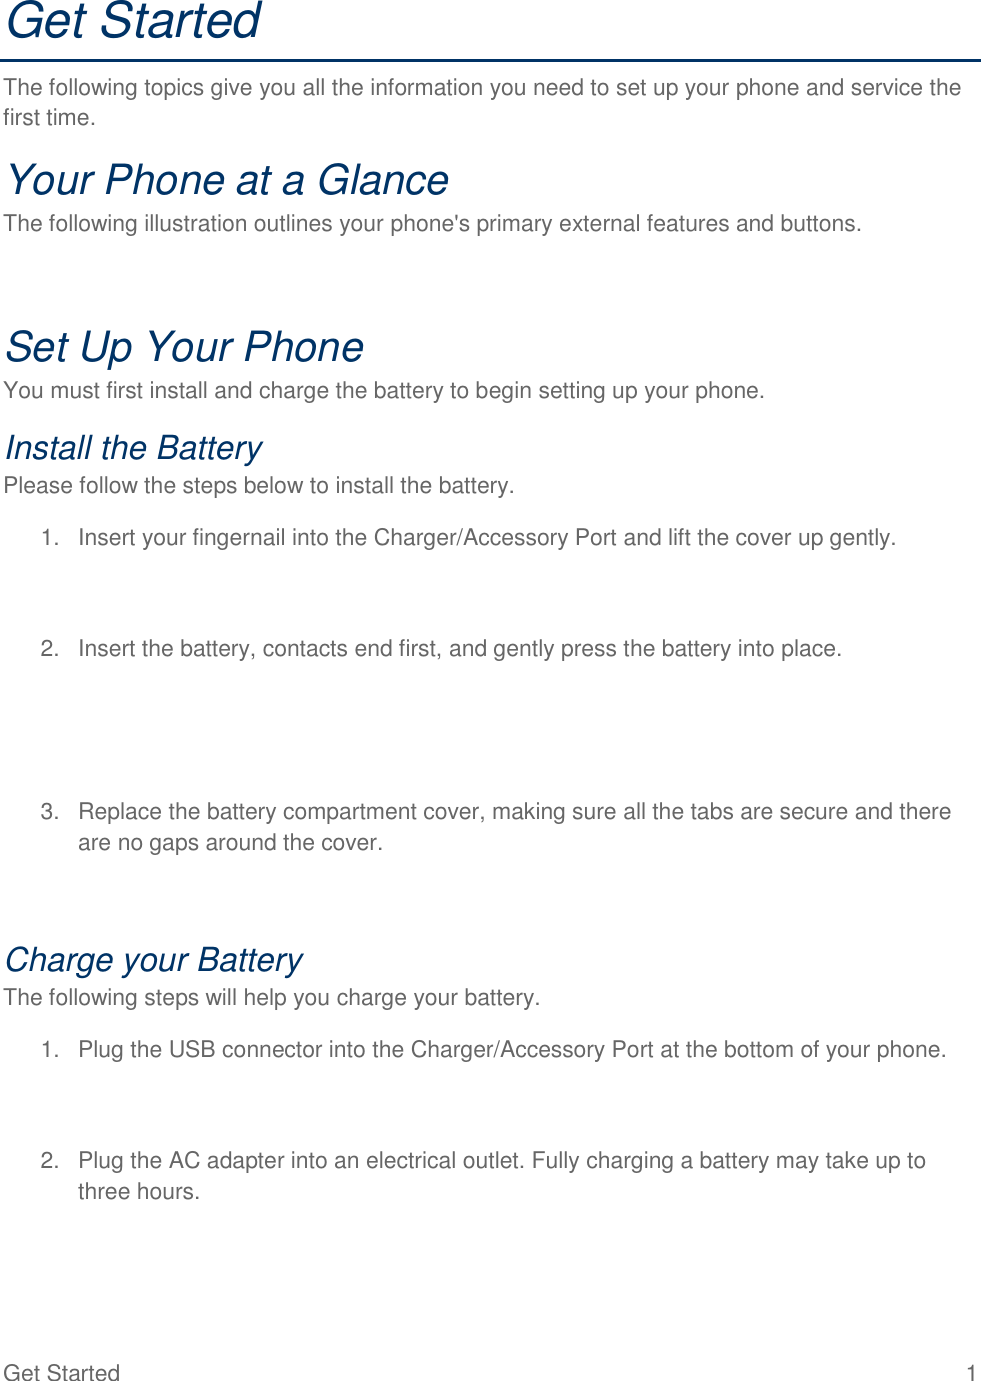 Get Started  1 Get Started The following topics give you all the information you need to set up your phone and service the first time. Your Phone at a Glance The following illustration outlines your phone&apos;s primary external features and buttons. Set Up Your Phone You must first install and charge the battery to begin setting up your phone. Install the Battery Please follow the steps below to install the battery. 1. Insert your fingernail into the Charger/Accessory Port and lift the cover up gently.2. Insert the battery, contacts end first, and gently press the battery into place.3. Replace the battery compartment cover, making sure all the tabs are secure and thereare no gaps around the cover.Charge your Battery The following steps will help you charge your battery. 1. Plug the USB connector into the Charger/Accessory Port at the bottom of your phone.2. Plug the AC adapter into an electrical outlet. Fully charging a battery may take up tothree hours.